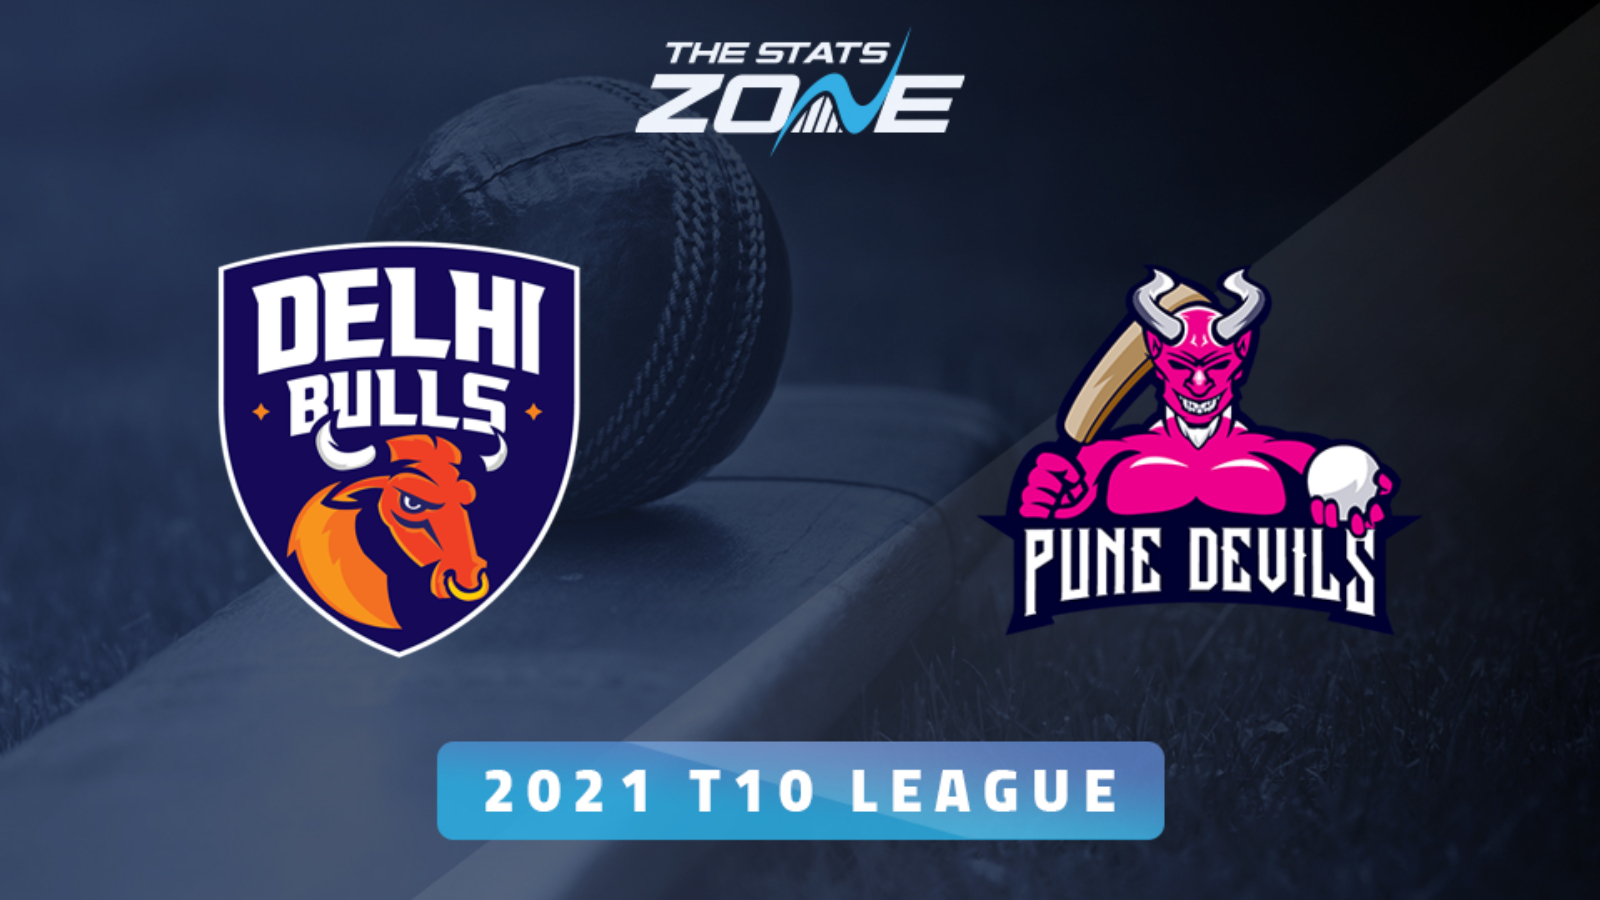 DB VS PD DREAM TEAM CRICKET MATCH AND PREVIEW- Pune Devils will win this match.